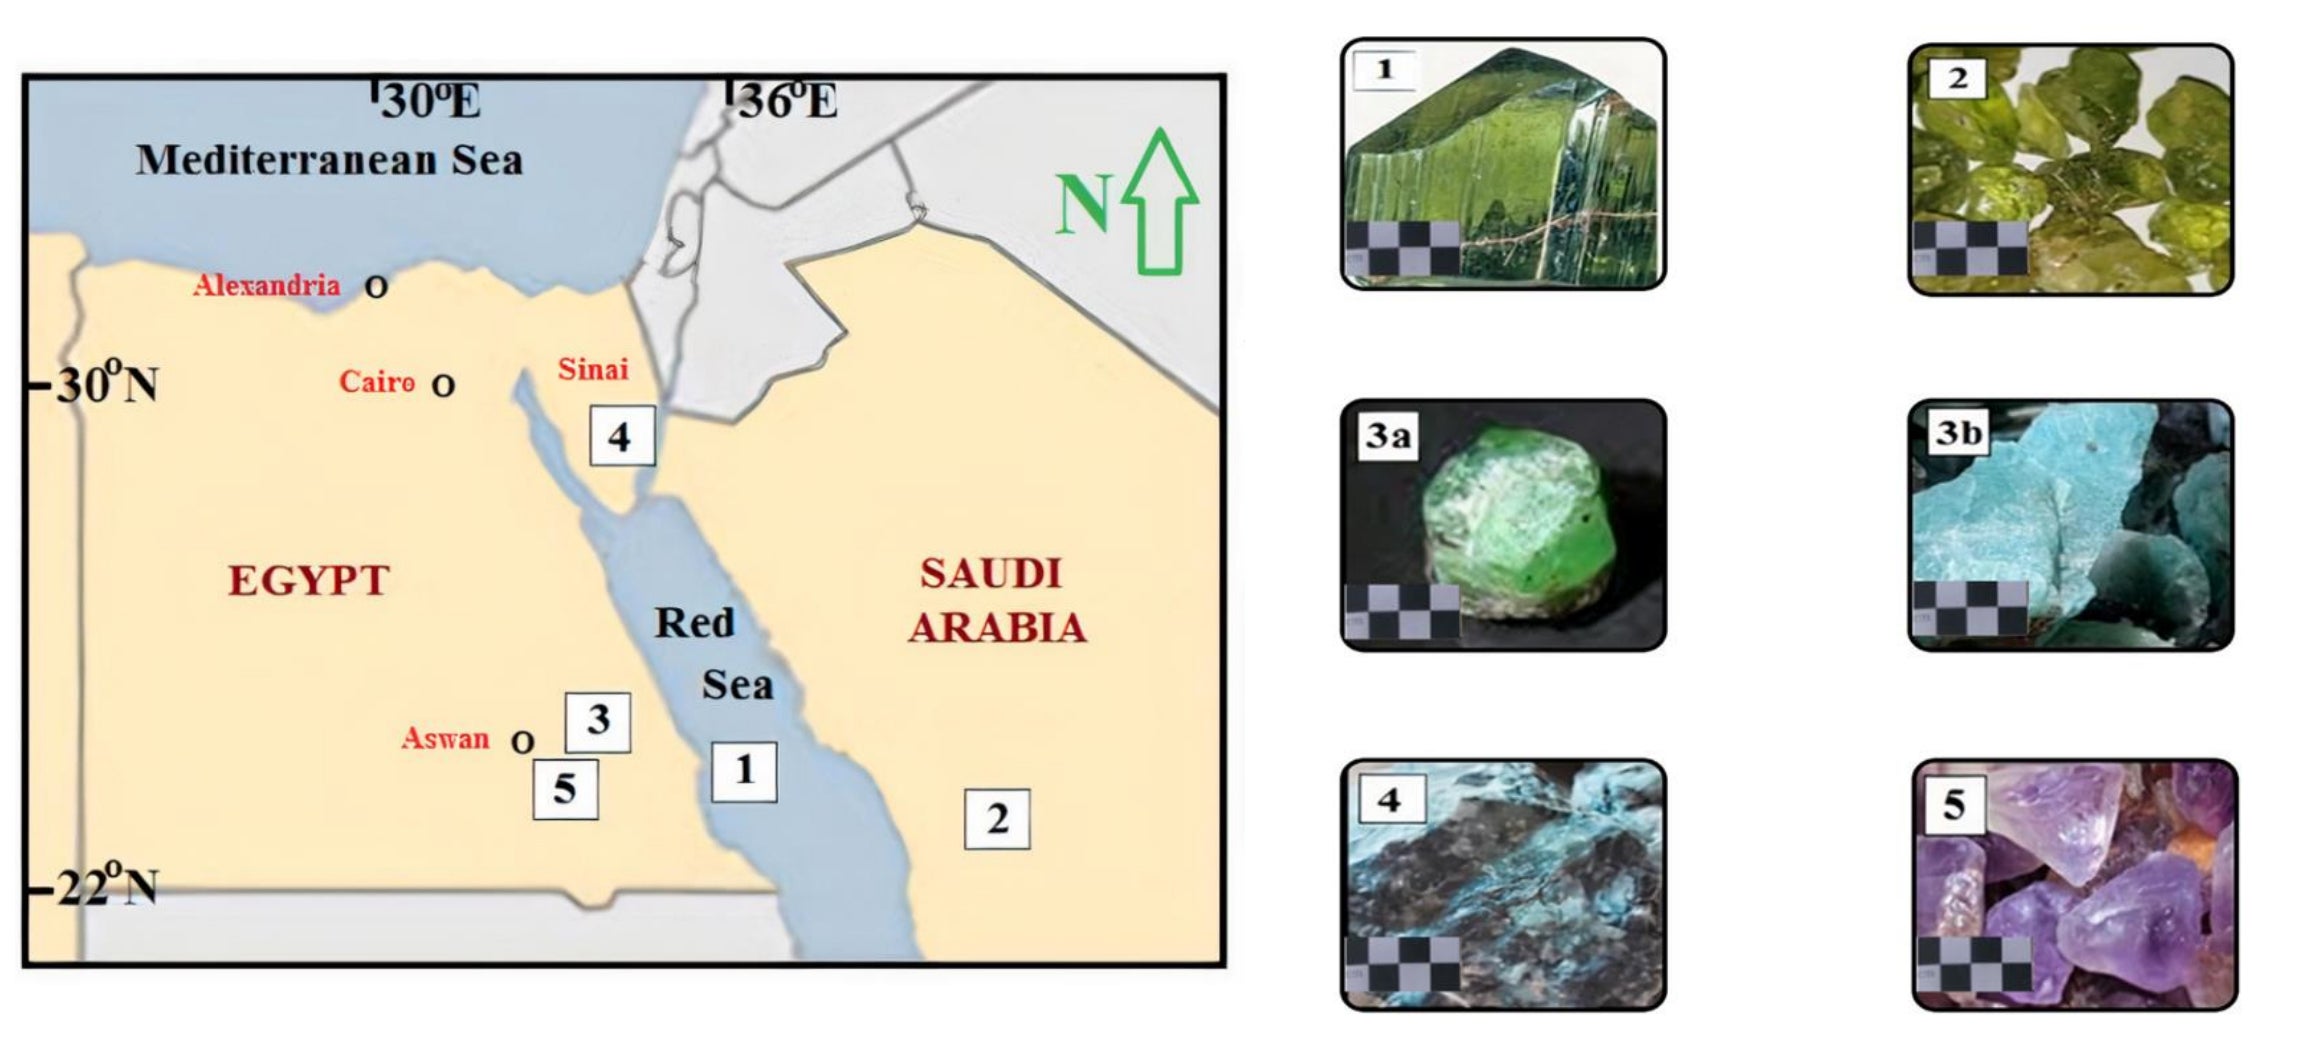 Locations of the investigated gem minerals from Egypt and Saudi Arabia. Scaled photos of colored gem minerals are given. For all, field of view (FOV) = 4 cm. (1) Peridot, Zabargad (St. Johnâs), off the Egyptian Red Sea coast. (2) Peridot from Harrat Kishb (volcanic field), Saudi Arabia. (3a) Emerald and (3b) Amazonite, Wadi Sikait, Wadi El-Gemal area, Eastern Desert, Egypt. (4) Low-grade emerald (beryl), Wadi Ghazala, Sinai Peninsula, Egypt. (5) Amethyst, Aswan area, Eastern Desert, Egypt. CREDIT: Khedr et al.